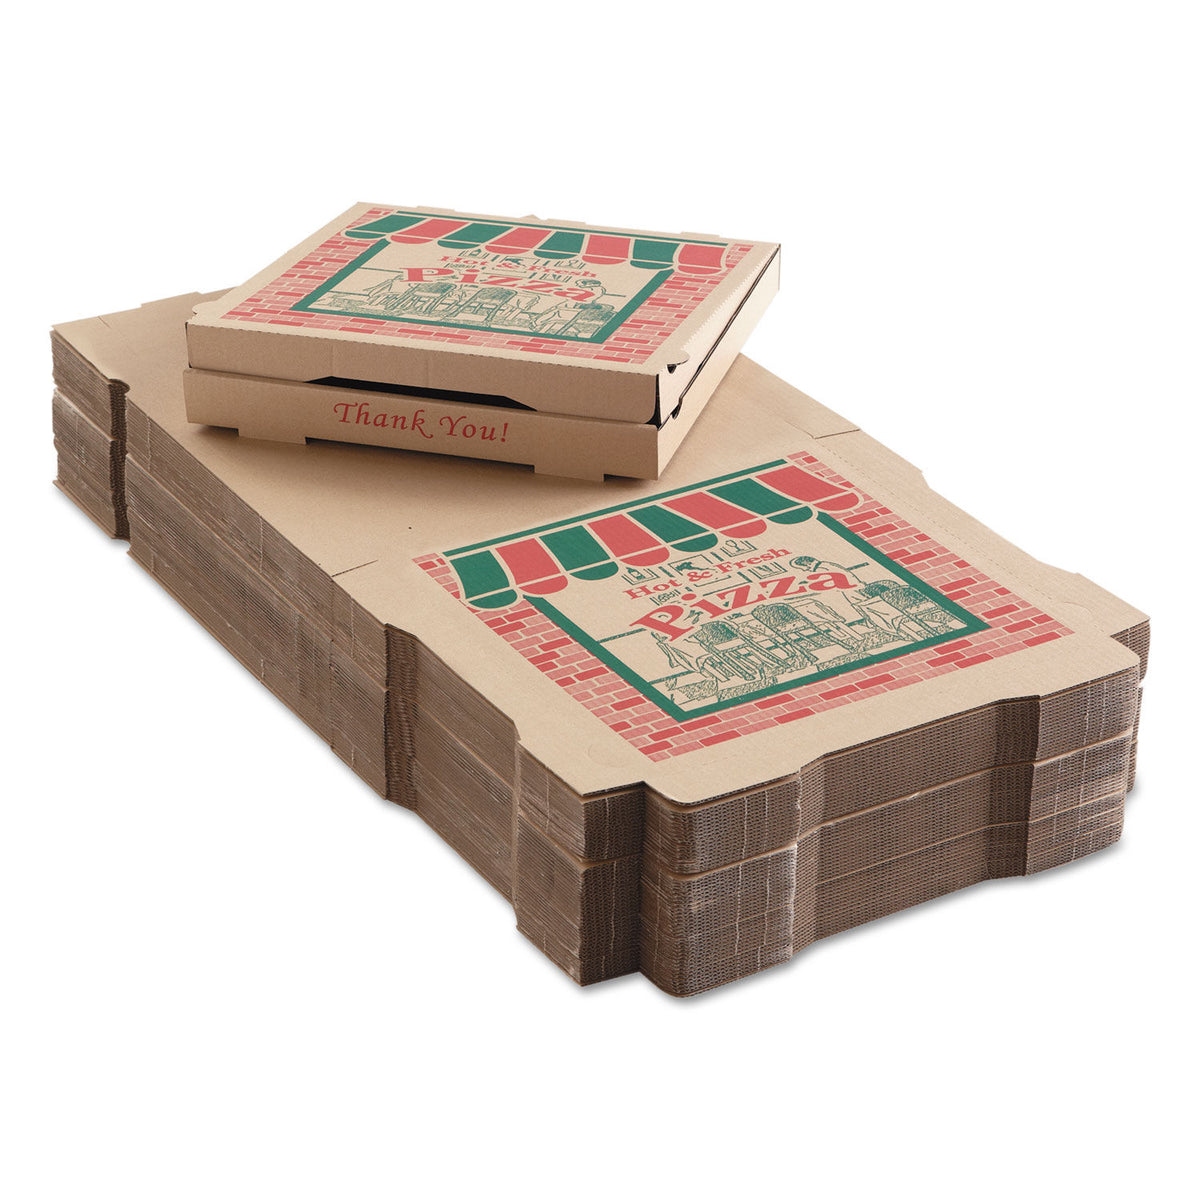 GreenBox 16 x 16 x 2 Corrugated Pizza Box with Built-In Plates